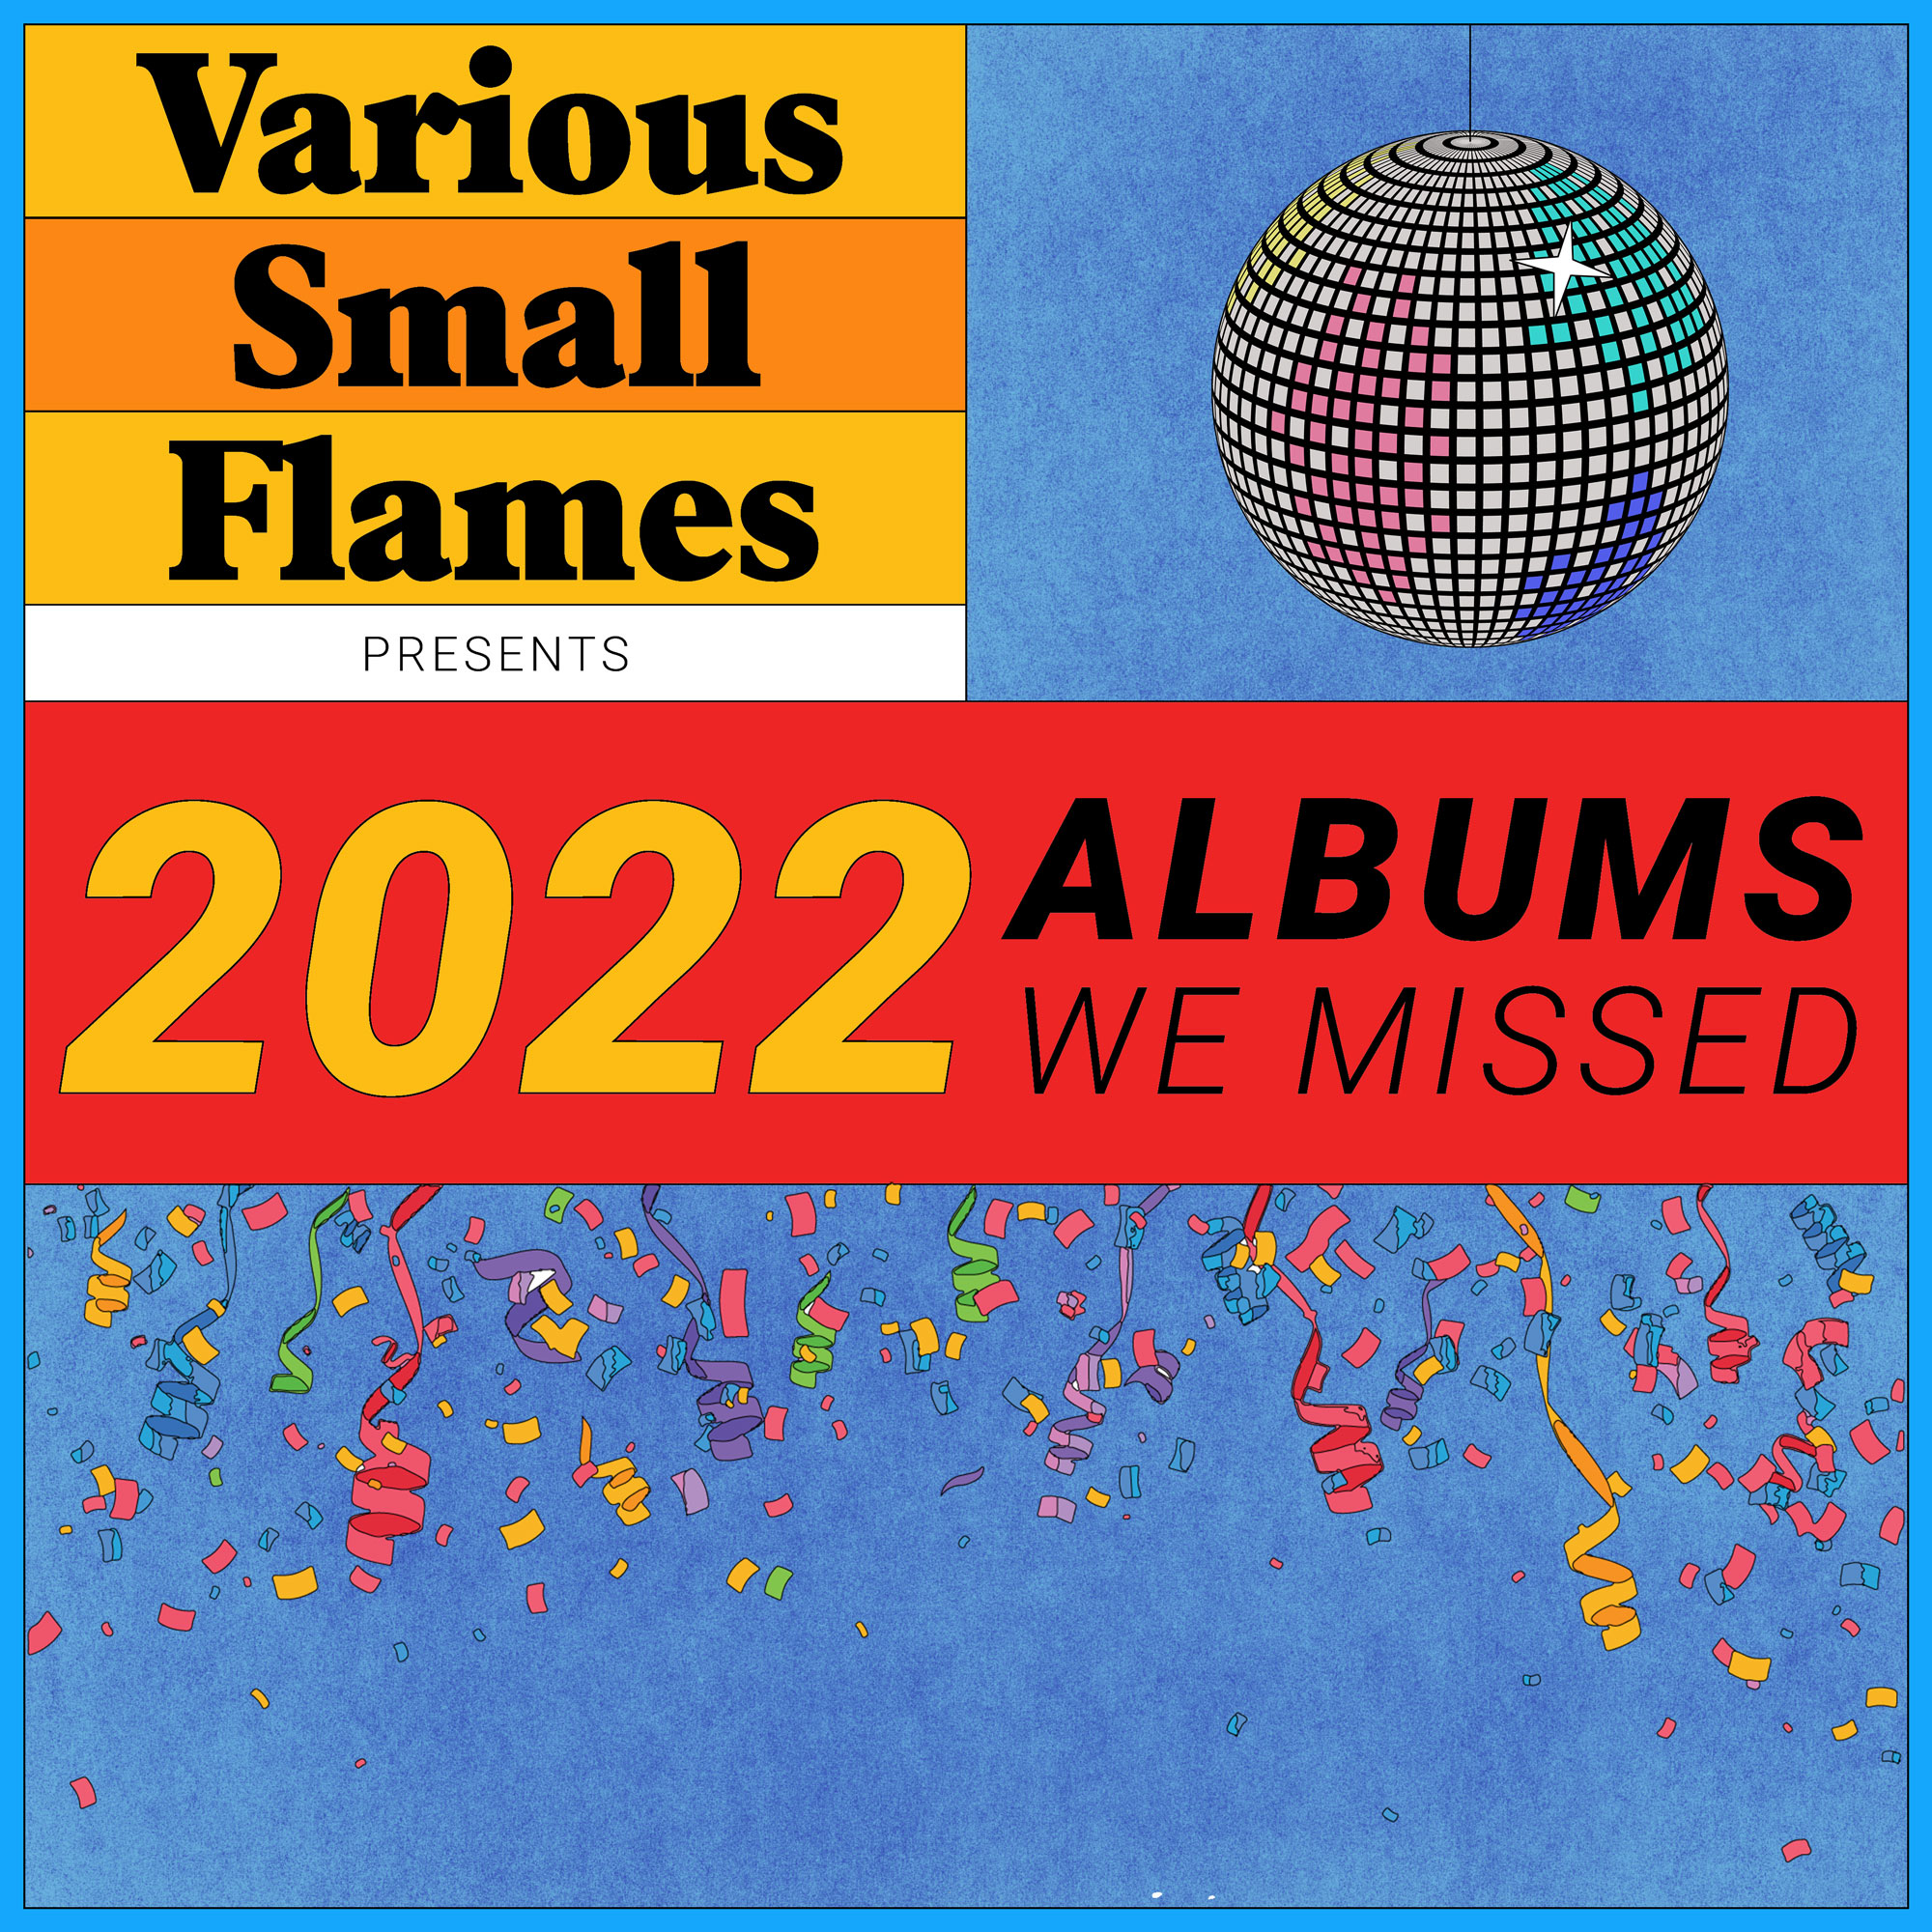 Various Small Flames Albums We Missed 2022 - illustration of a glitter ball and colourful ticker tape against a blue background